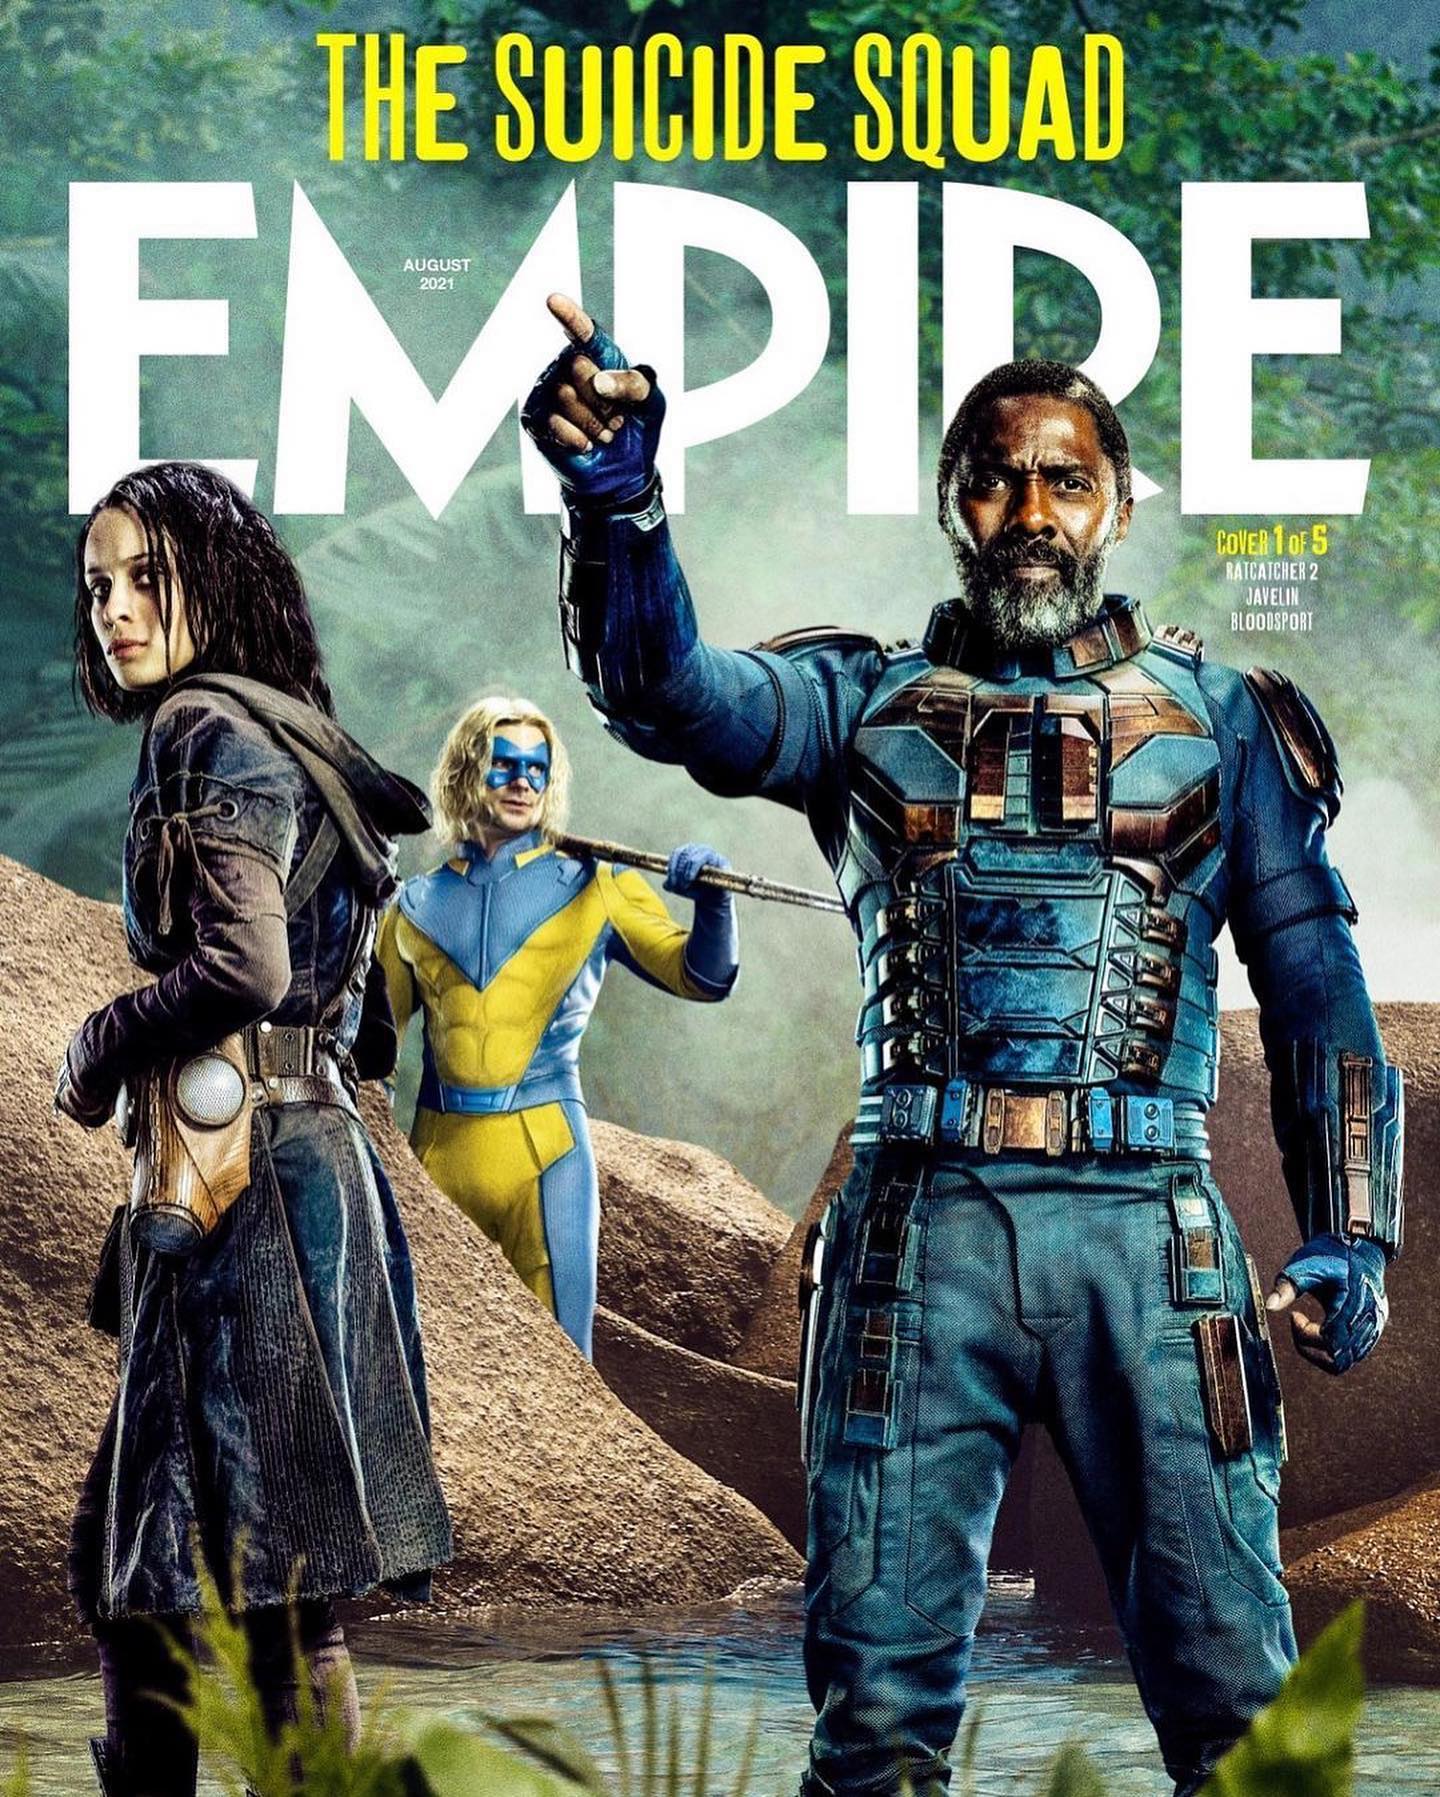 The Suicide Squad - Empire Magazine Cover - August 2021 [1 of 5]